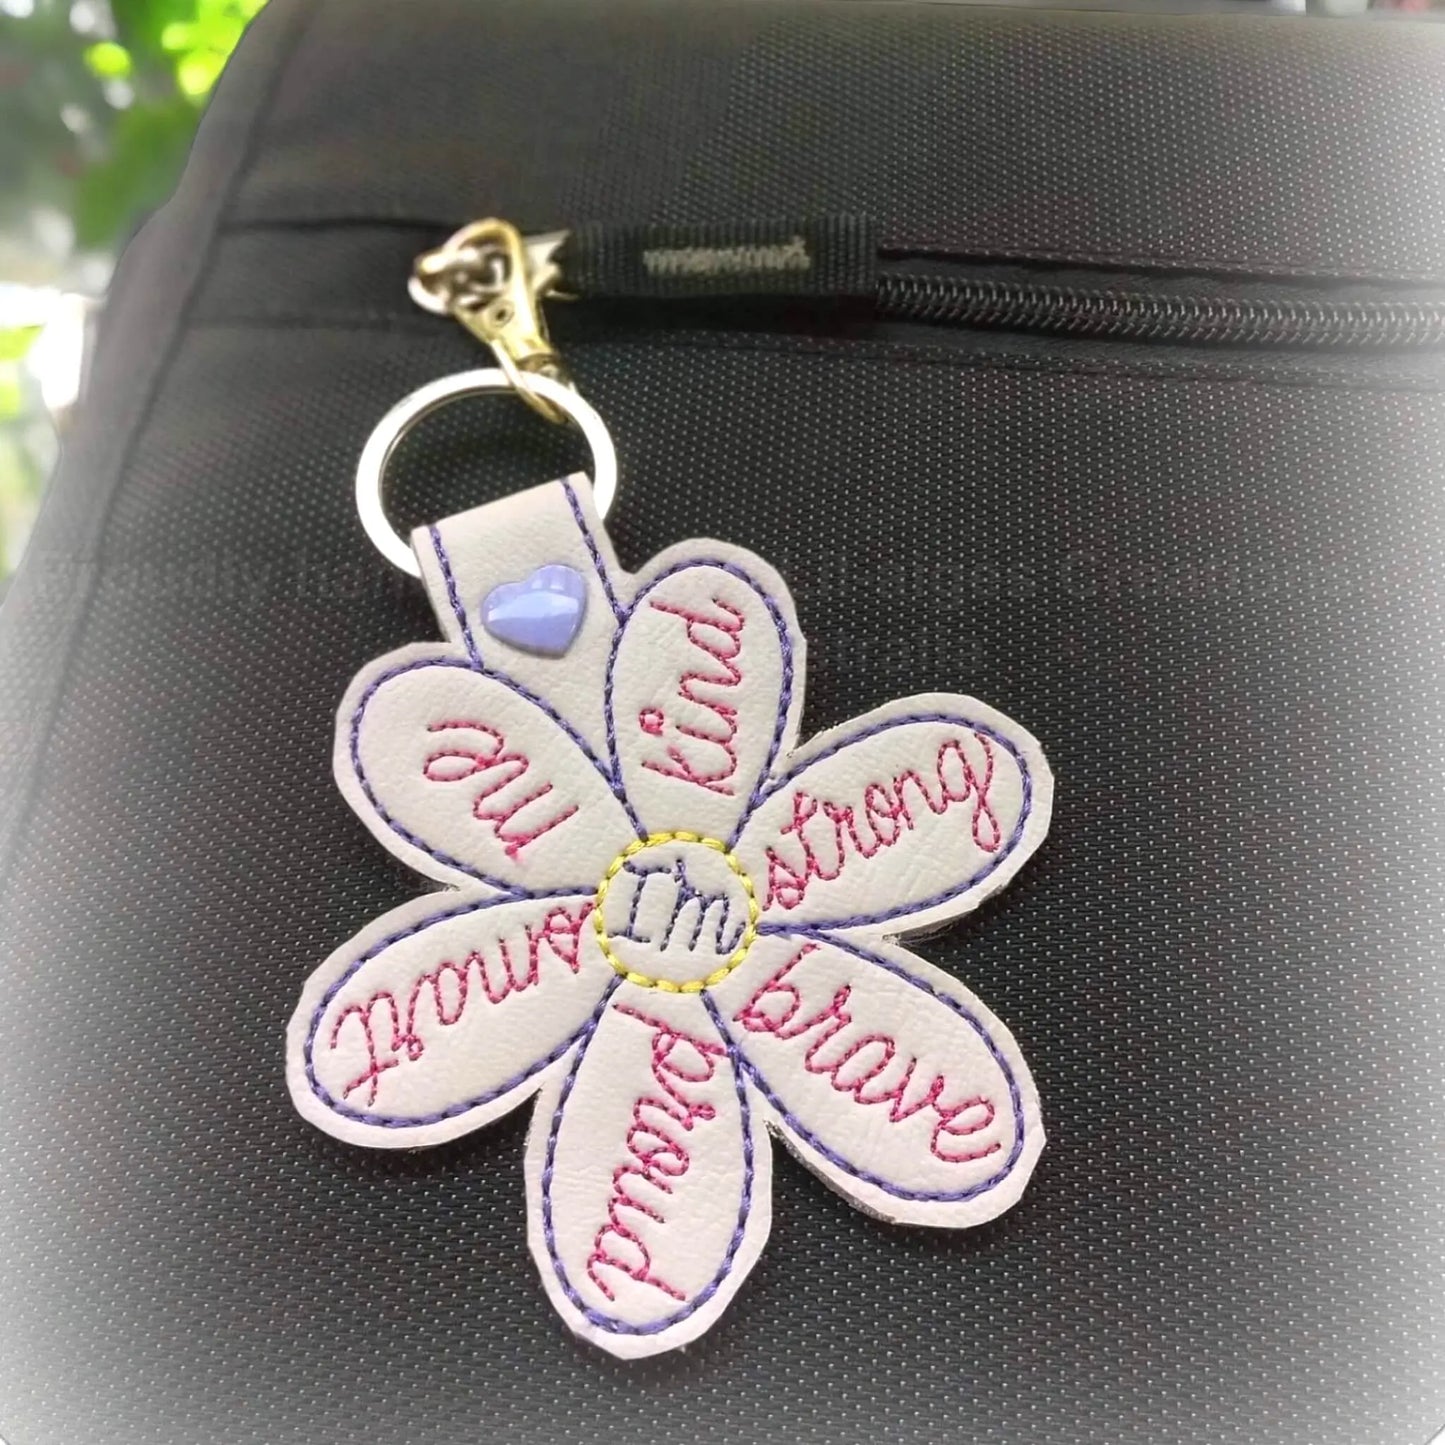 Inspirational keyrings, self confidence, self esteem, mindfulness, gift ideas, keychains, key fobs, available now, made in Australia - Image #5